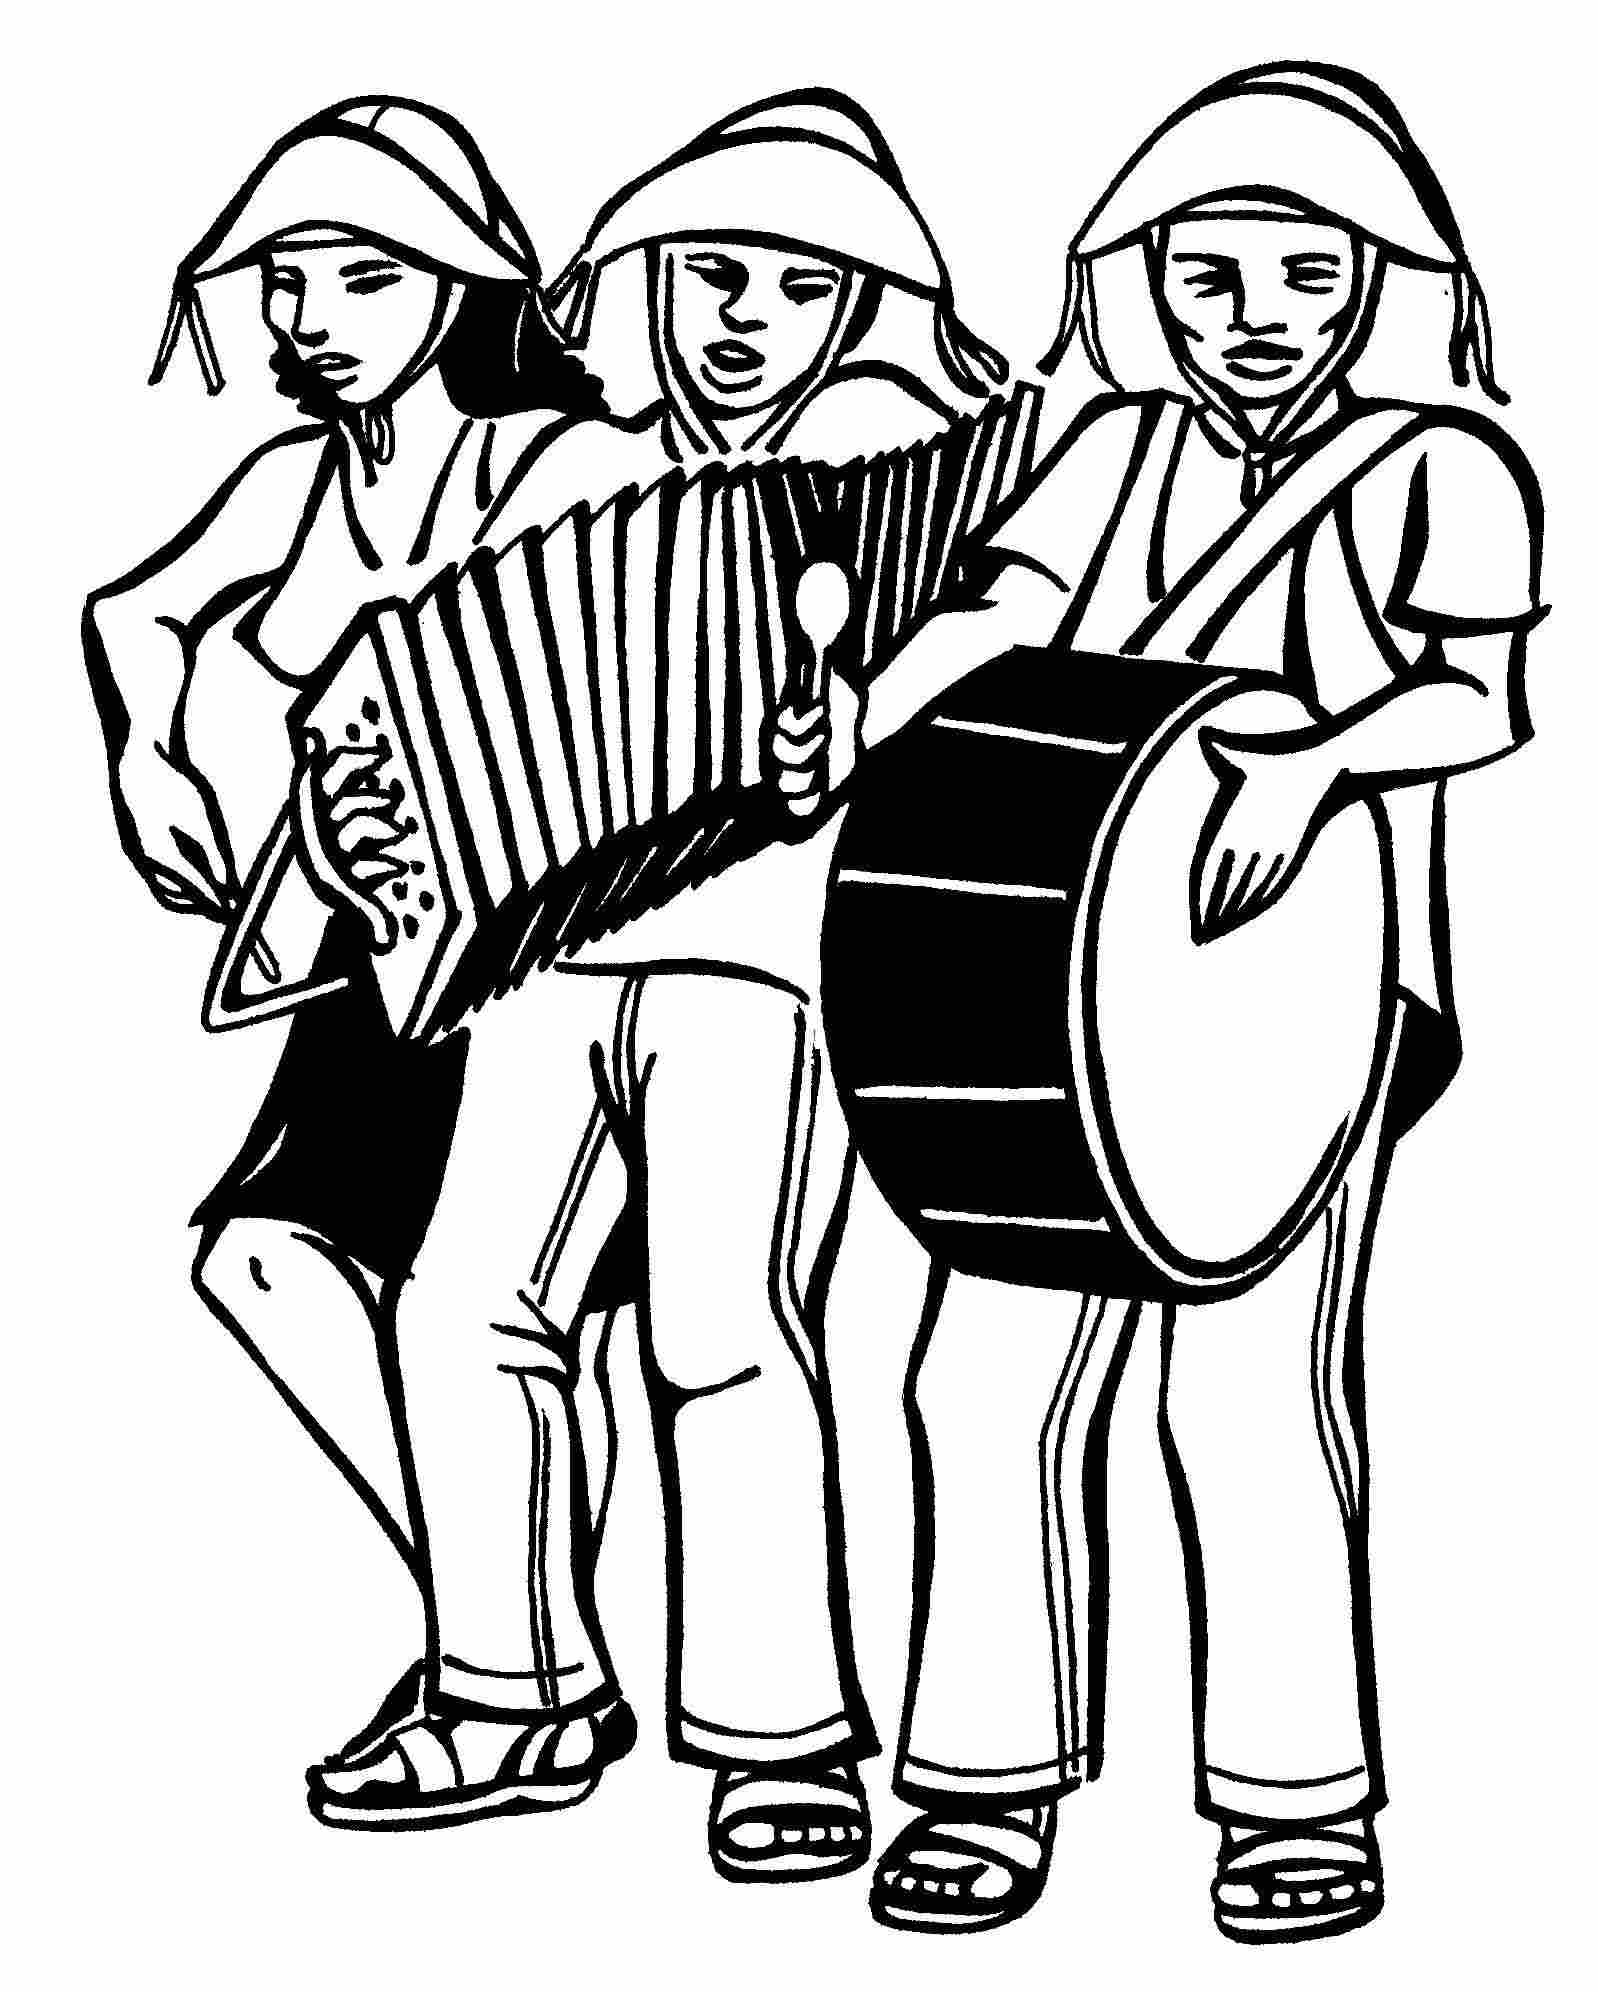  musical group 